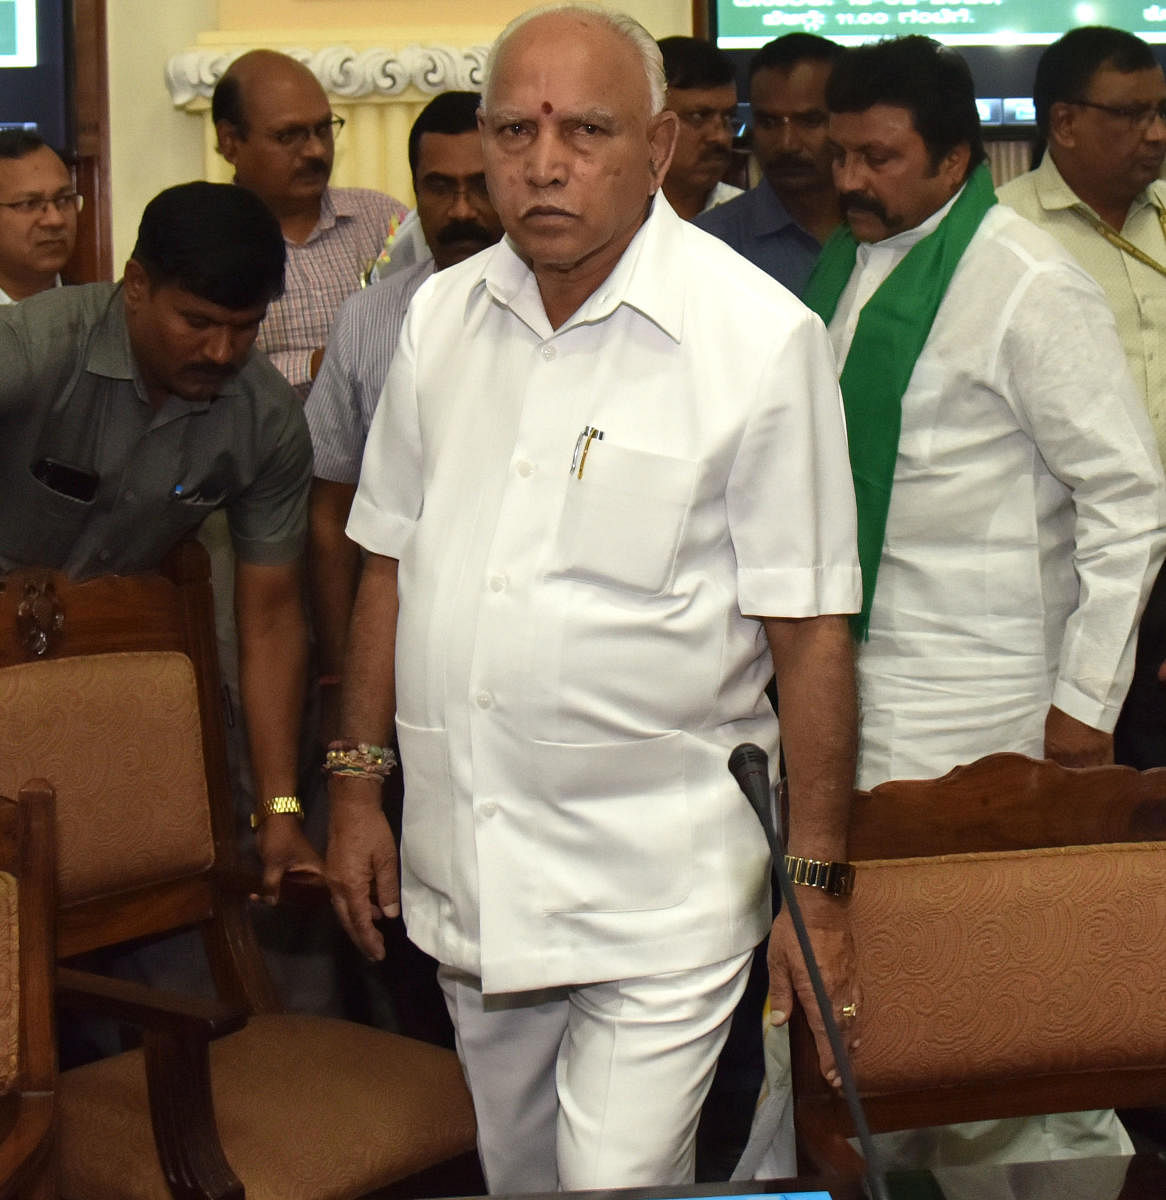 Chief Minister B S Yediyurappa and Agriculture Minister B C Patil at the Farmers meeting with Chief Minister at Vidhana Soudha in Bengaluru on Thursday, February 13, 2020. (DH Photo)